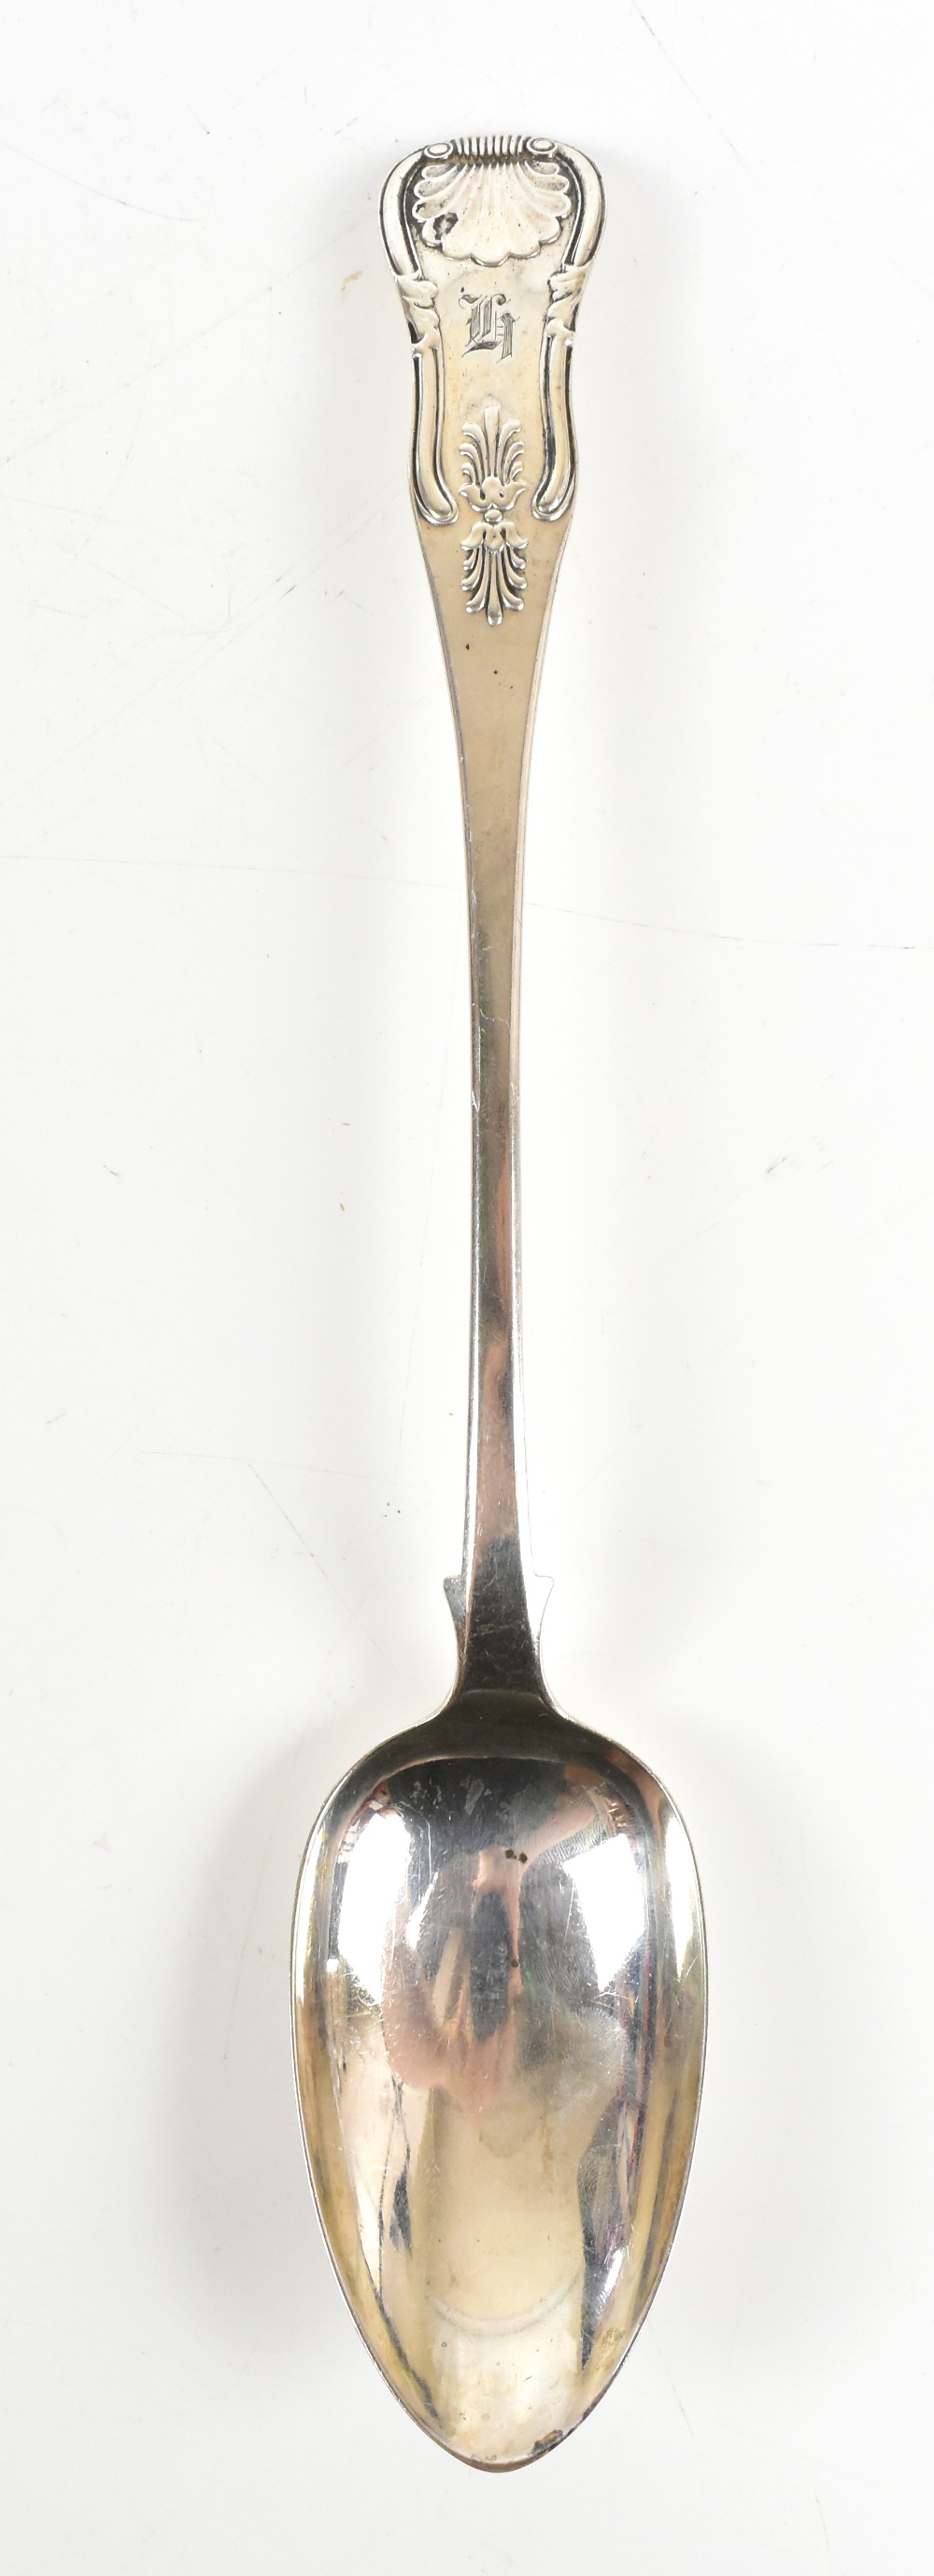 R & R KEAY; a Victorian hallmarked silver basting spoon decorated in the King's pattern, Edinburgh